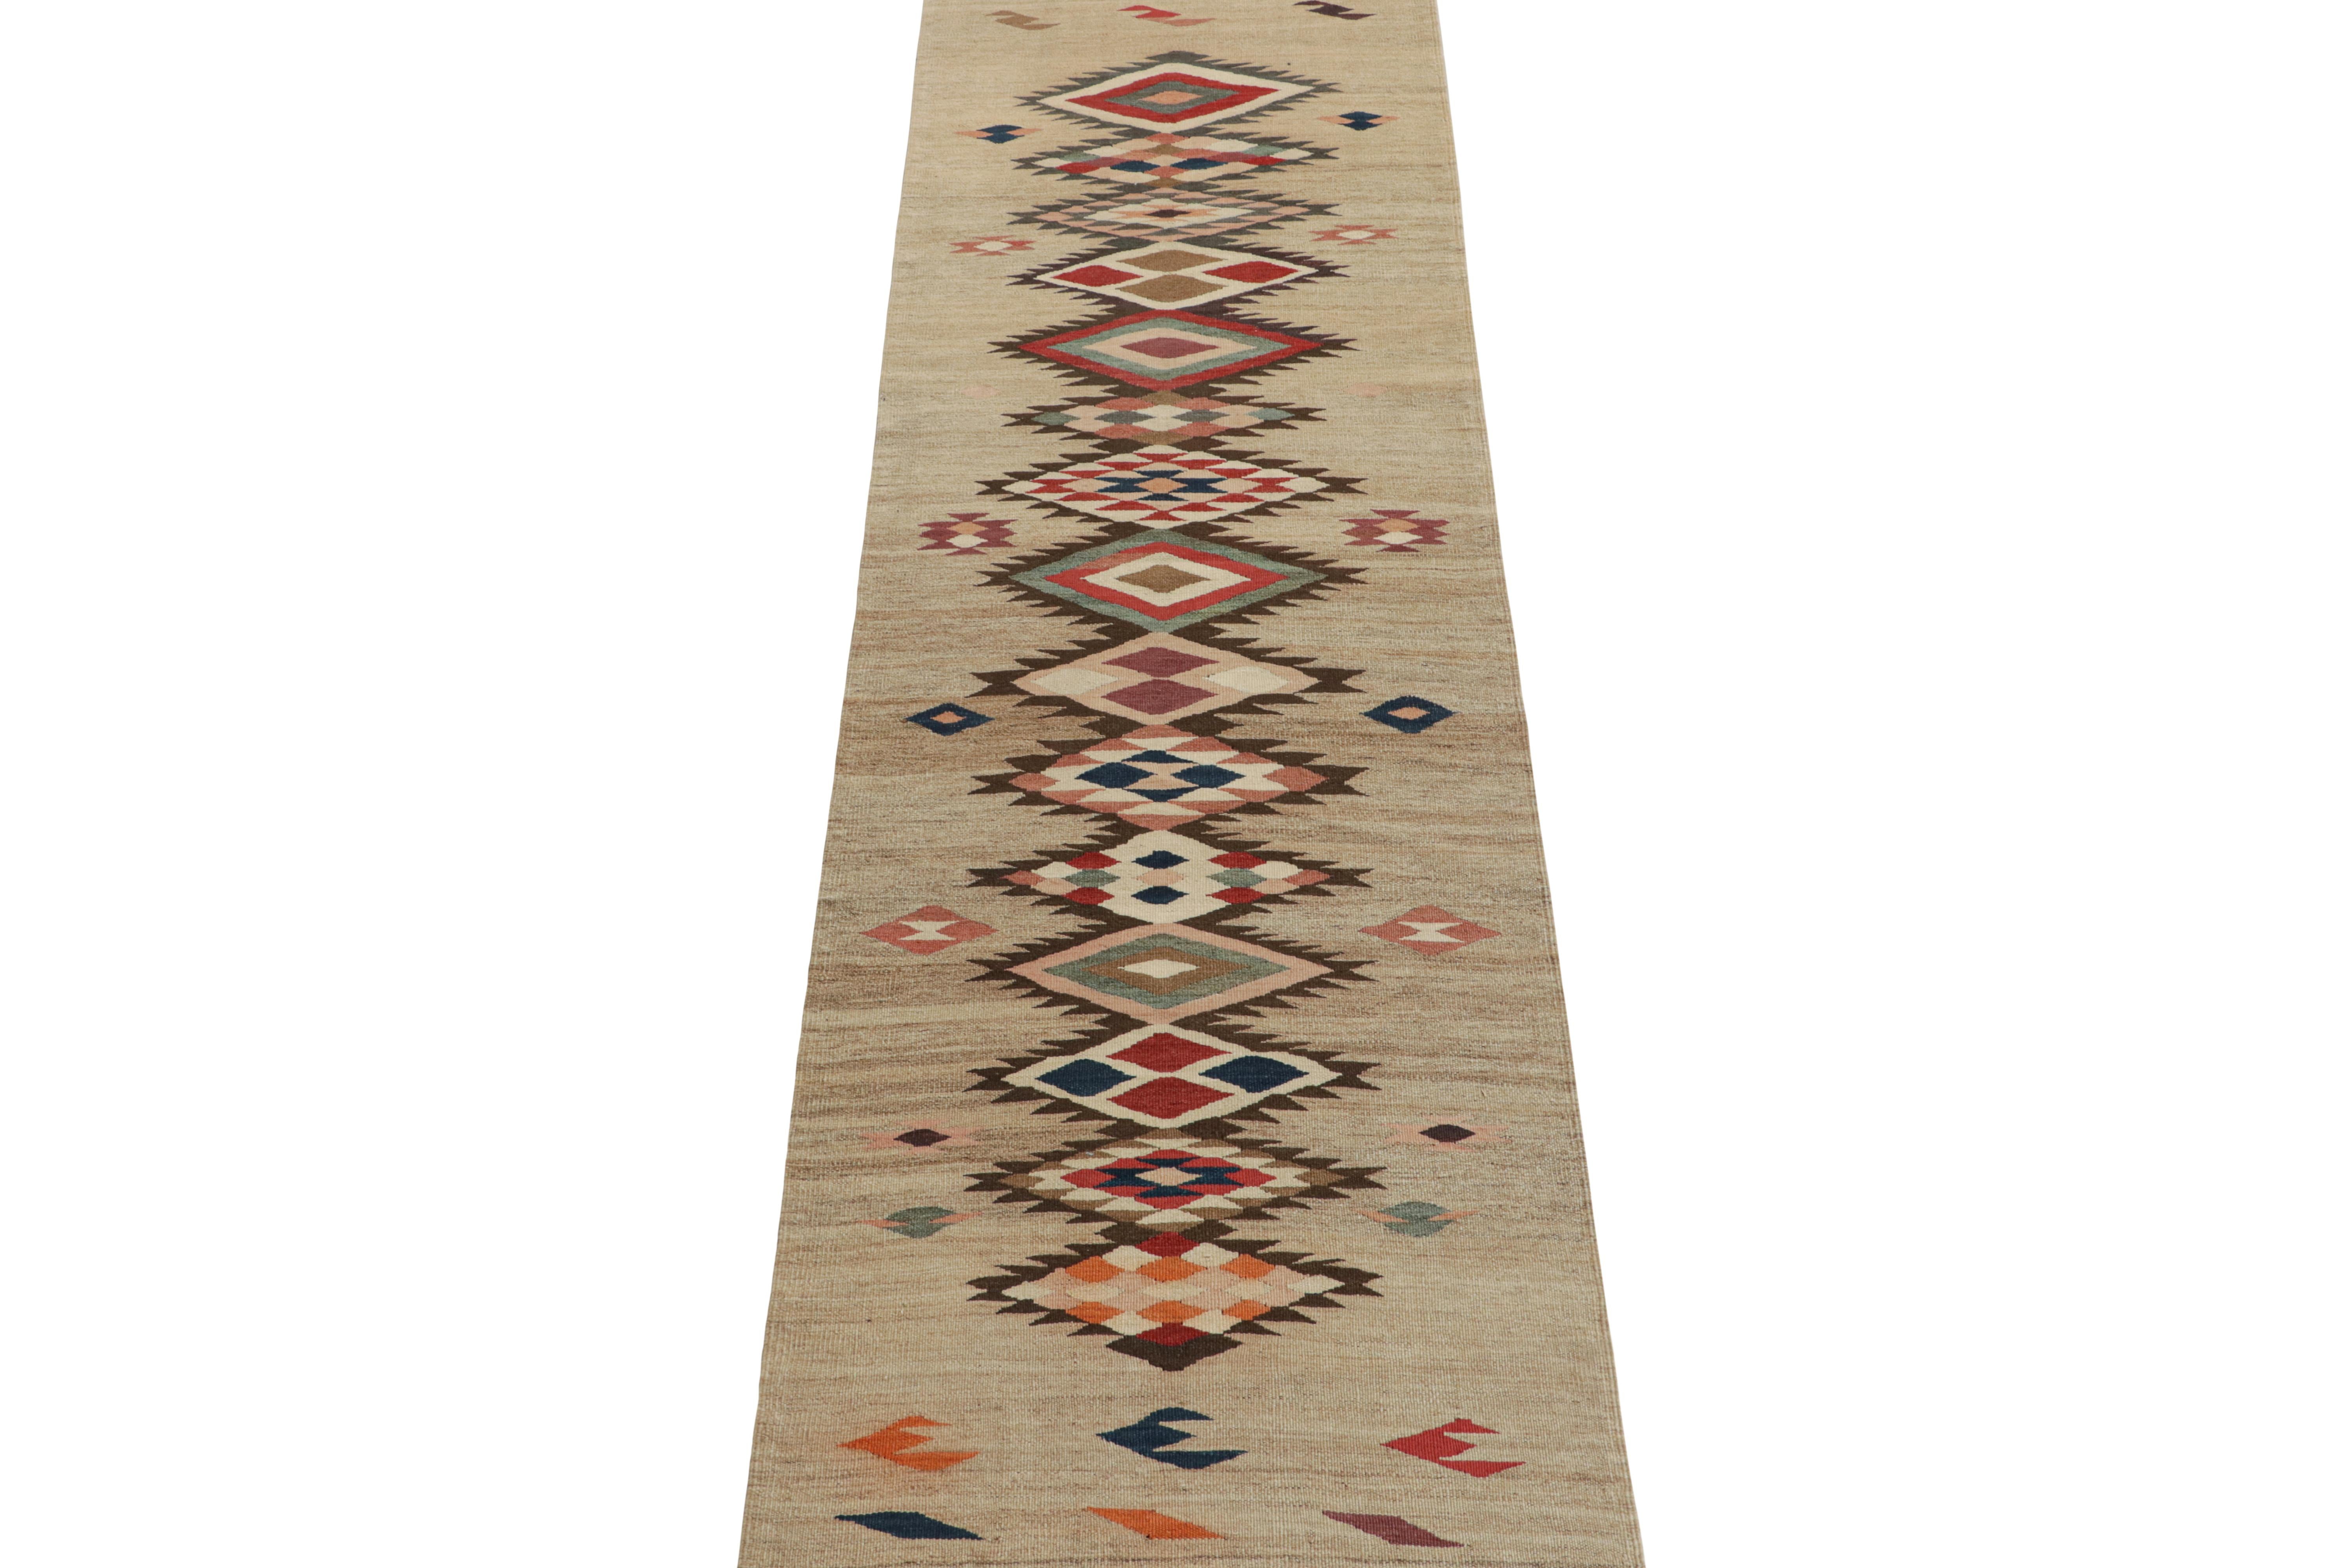 This vintage 3x9 Shahsavan kilim is a unique tribal runner for its period. Handwoven in wool, it originates from Turkey circa 1950-1960. 

Further on the Design:

Keen eyes will admire an almost Aztec style and influence in this play of soft